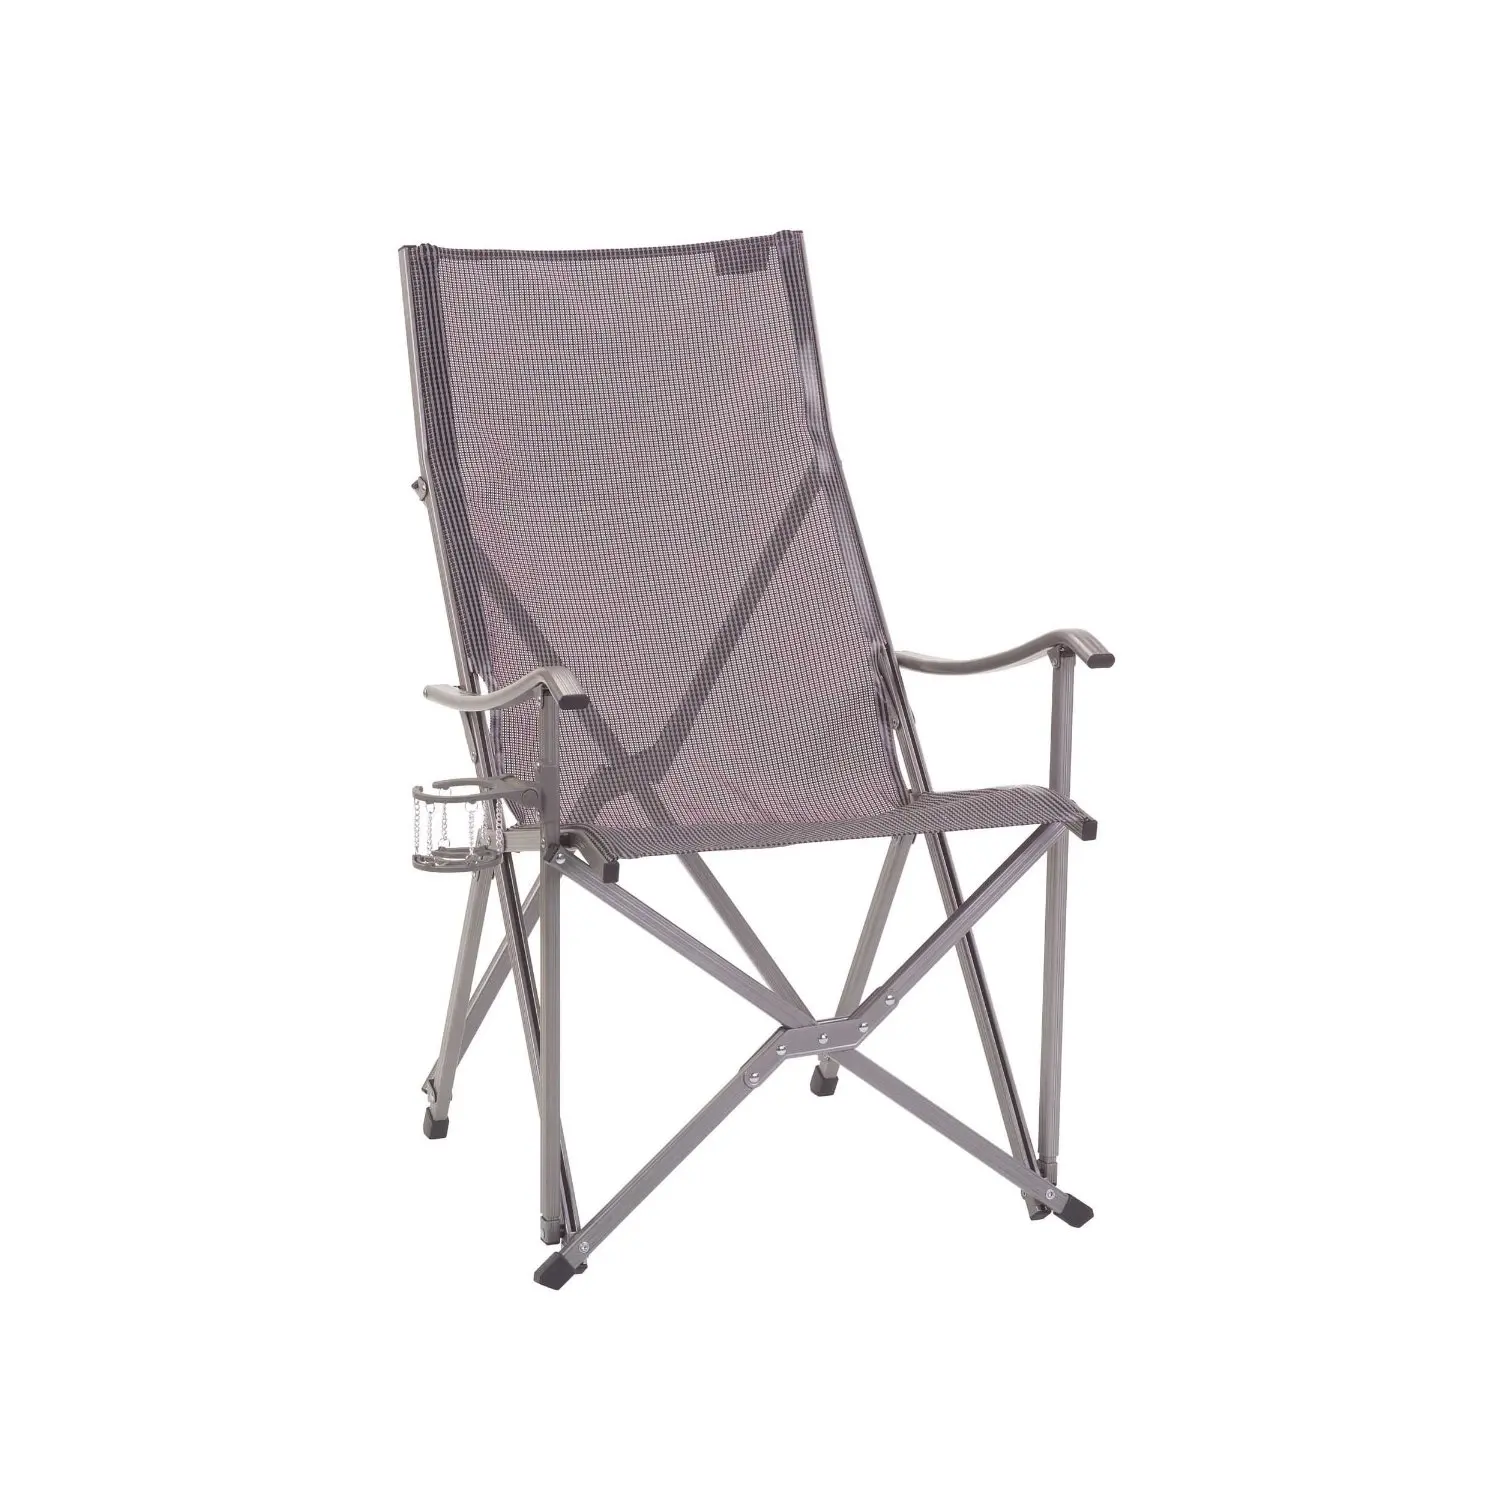 Cheap Patio Chair Sling Replacement, find Patio Chair ...